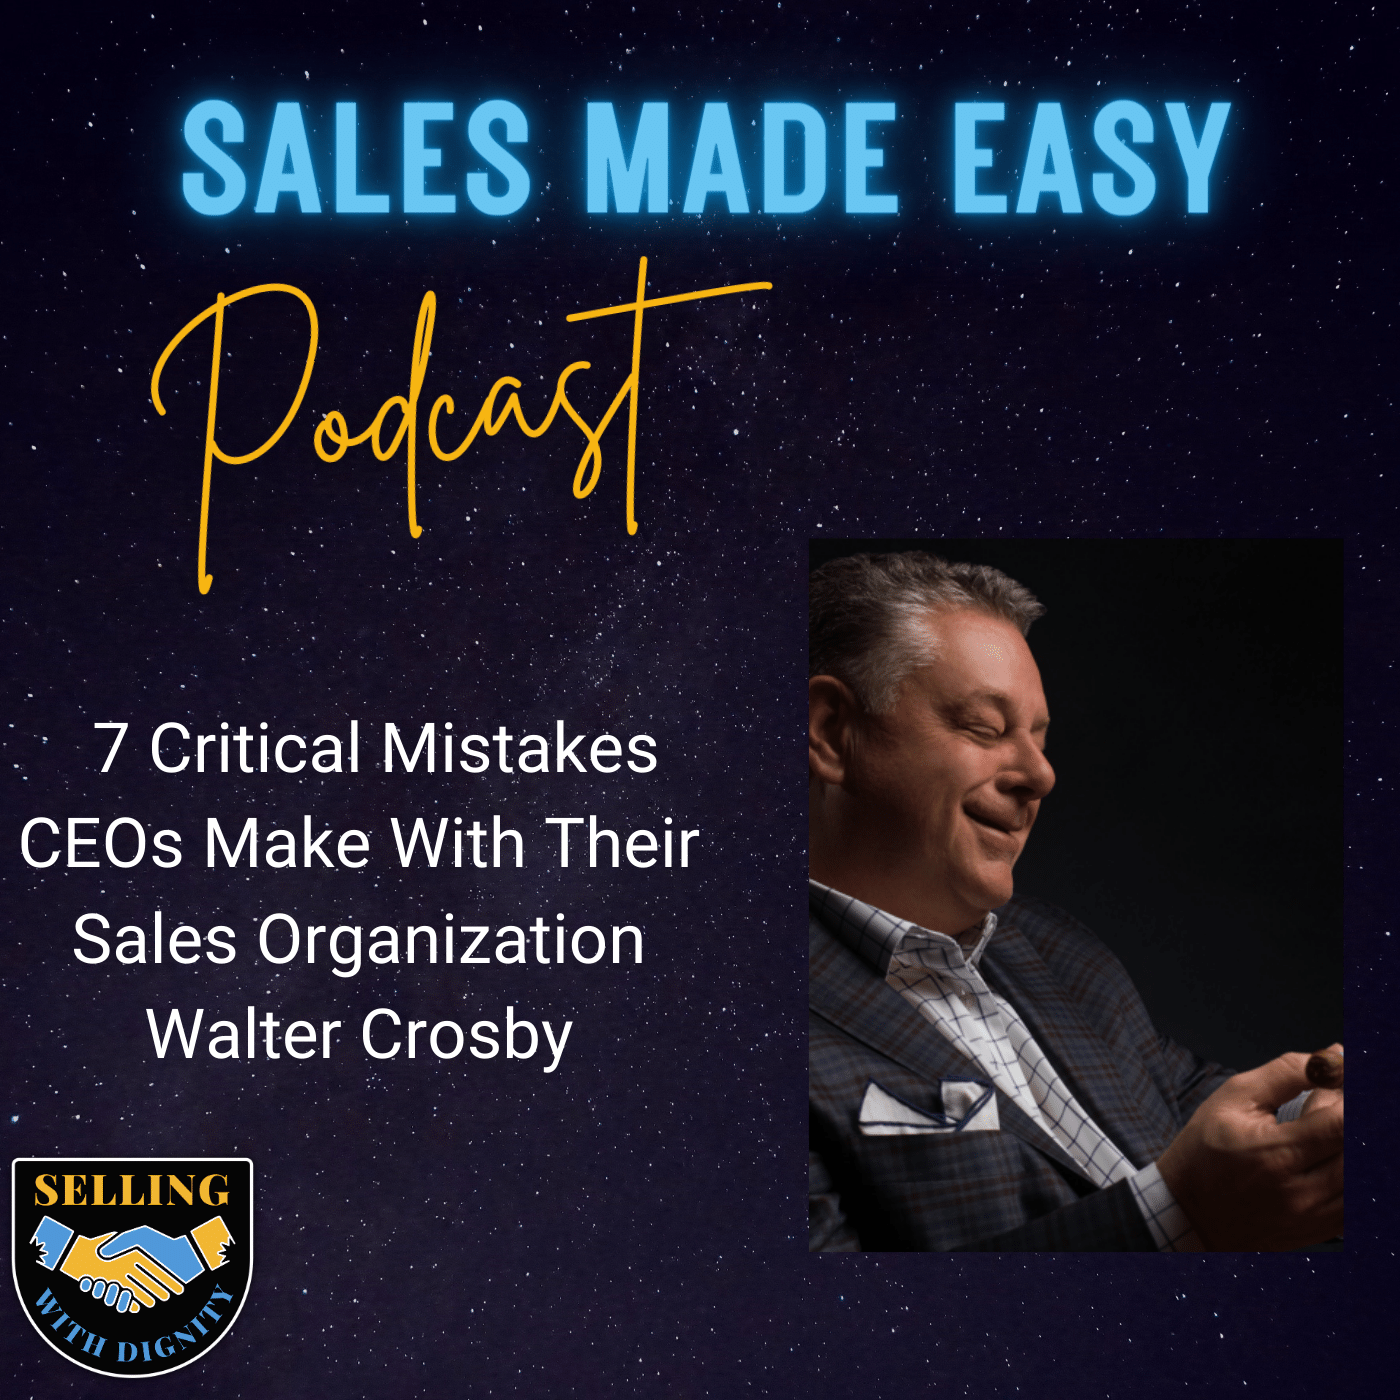 Walter Crosby Chats Sales and His Book Seven Critical Mistakes CEOs Make With Their Sales Organization